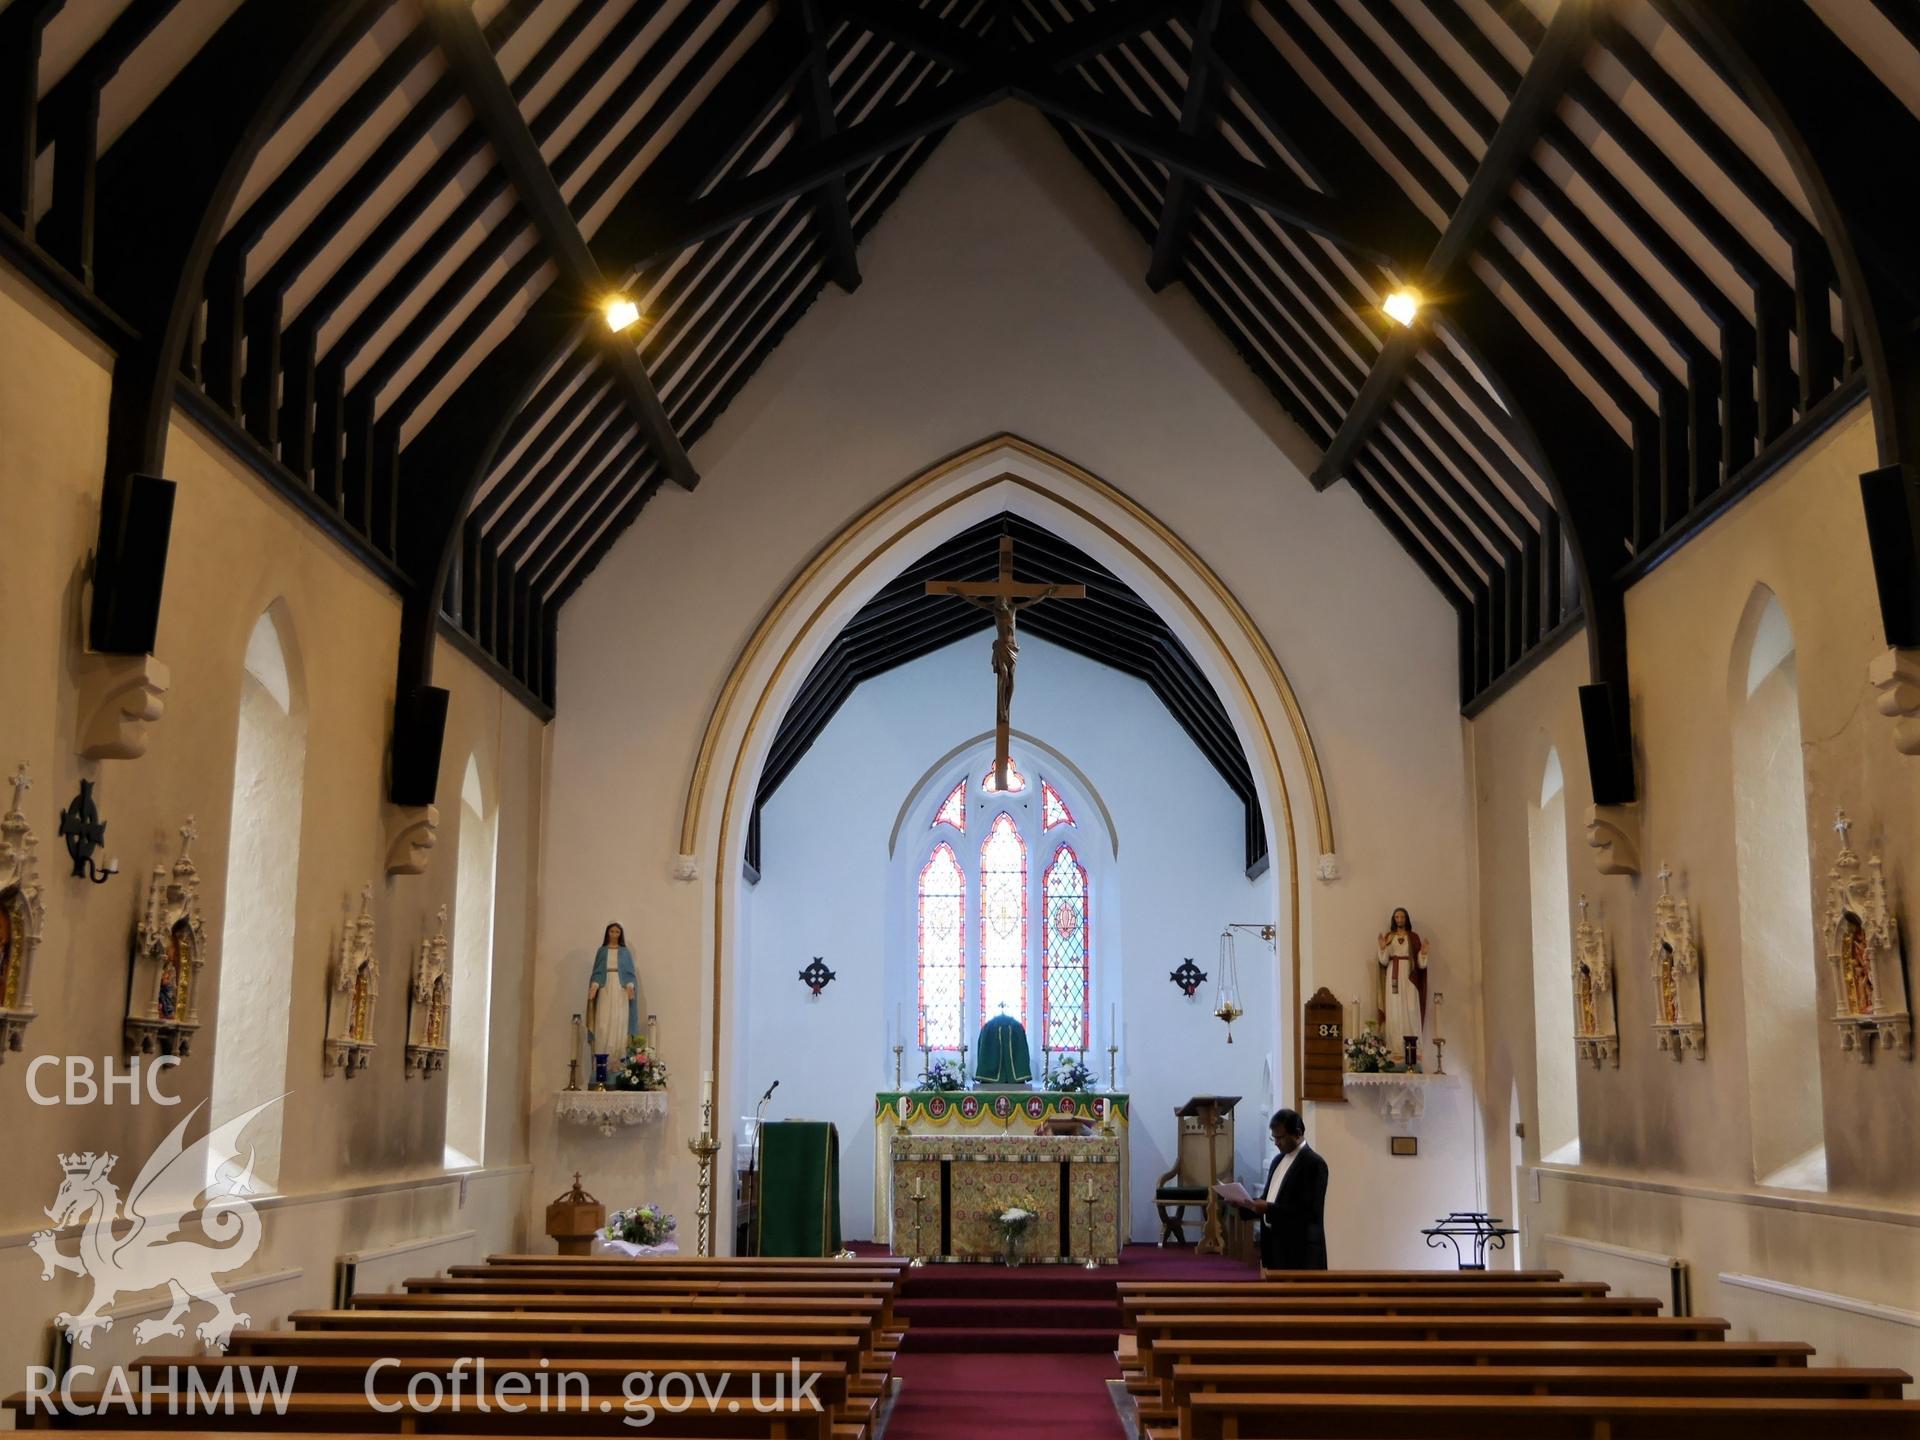 Digital colour photograph showing interior of St Michael's Catholic church, Brecon.